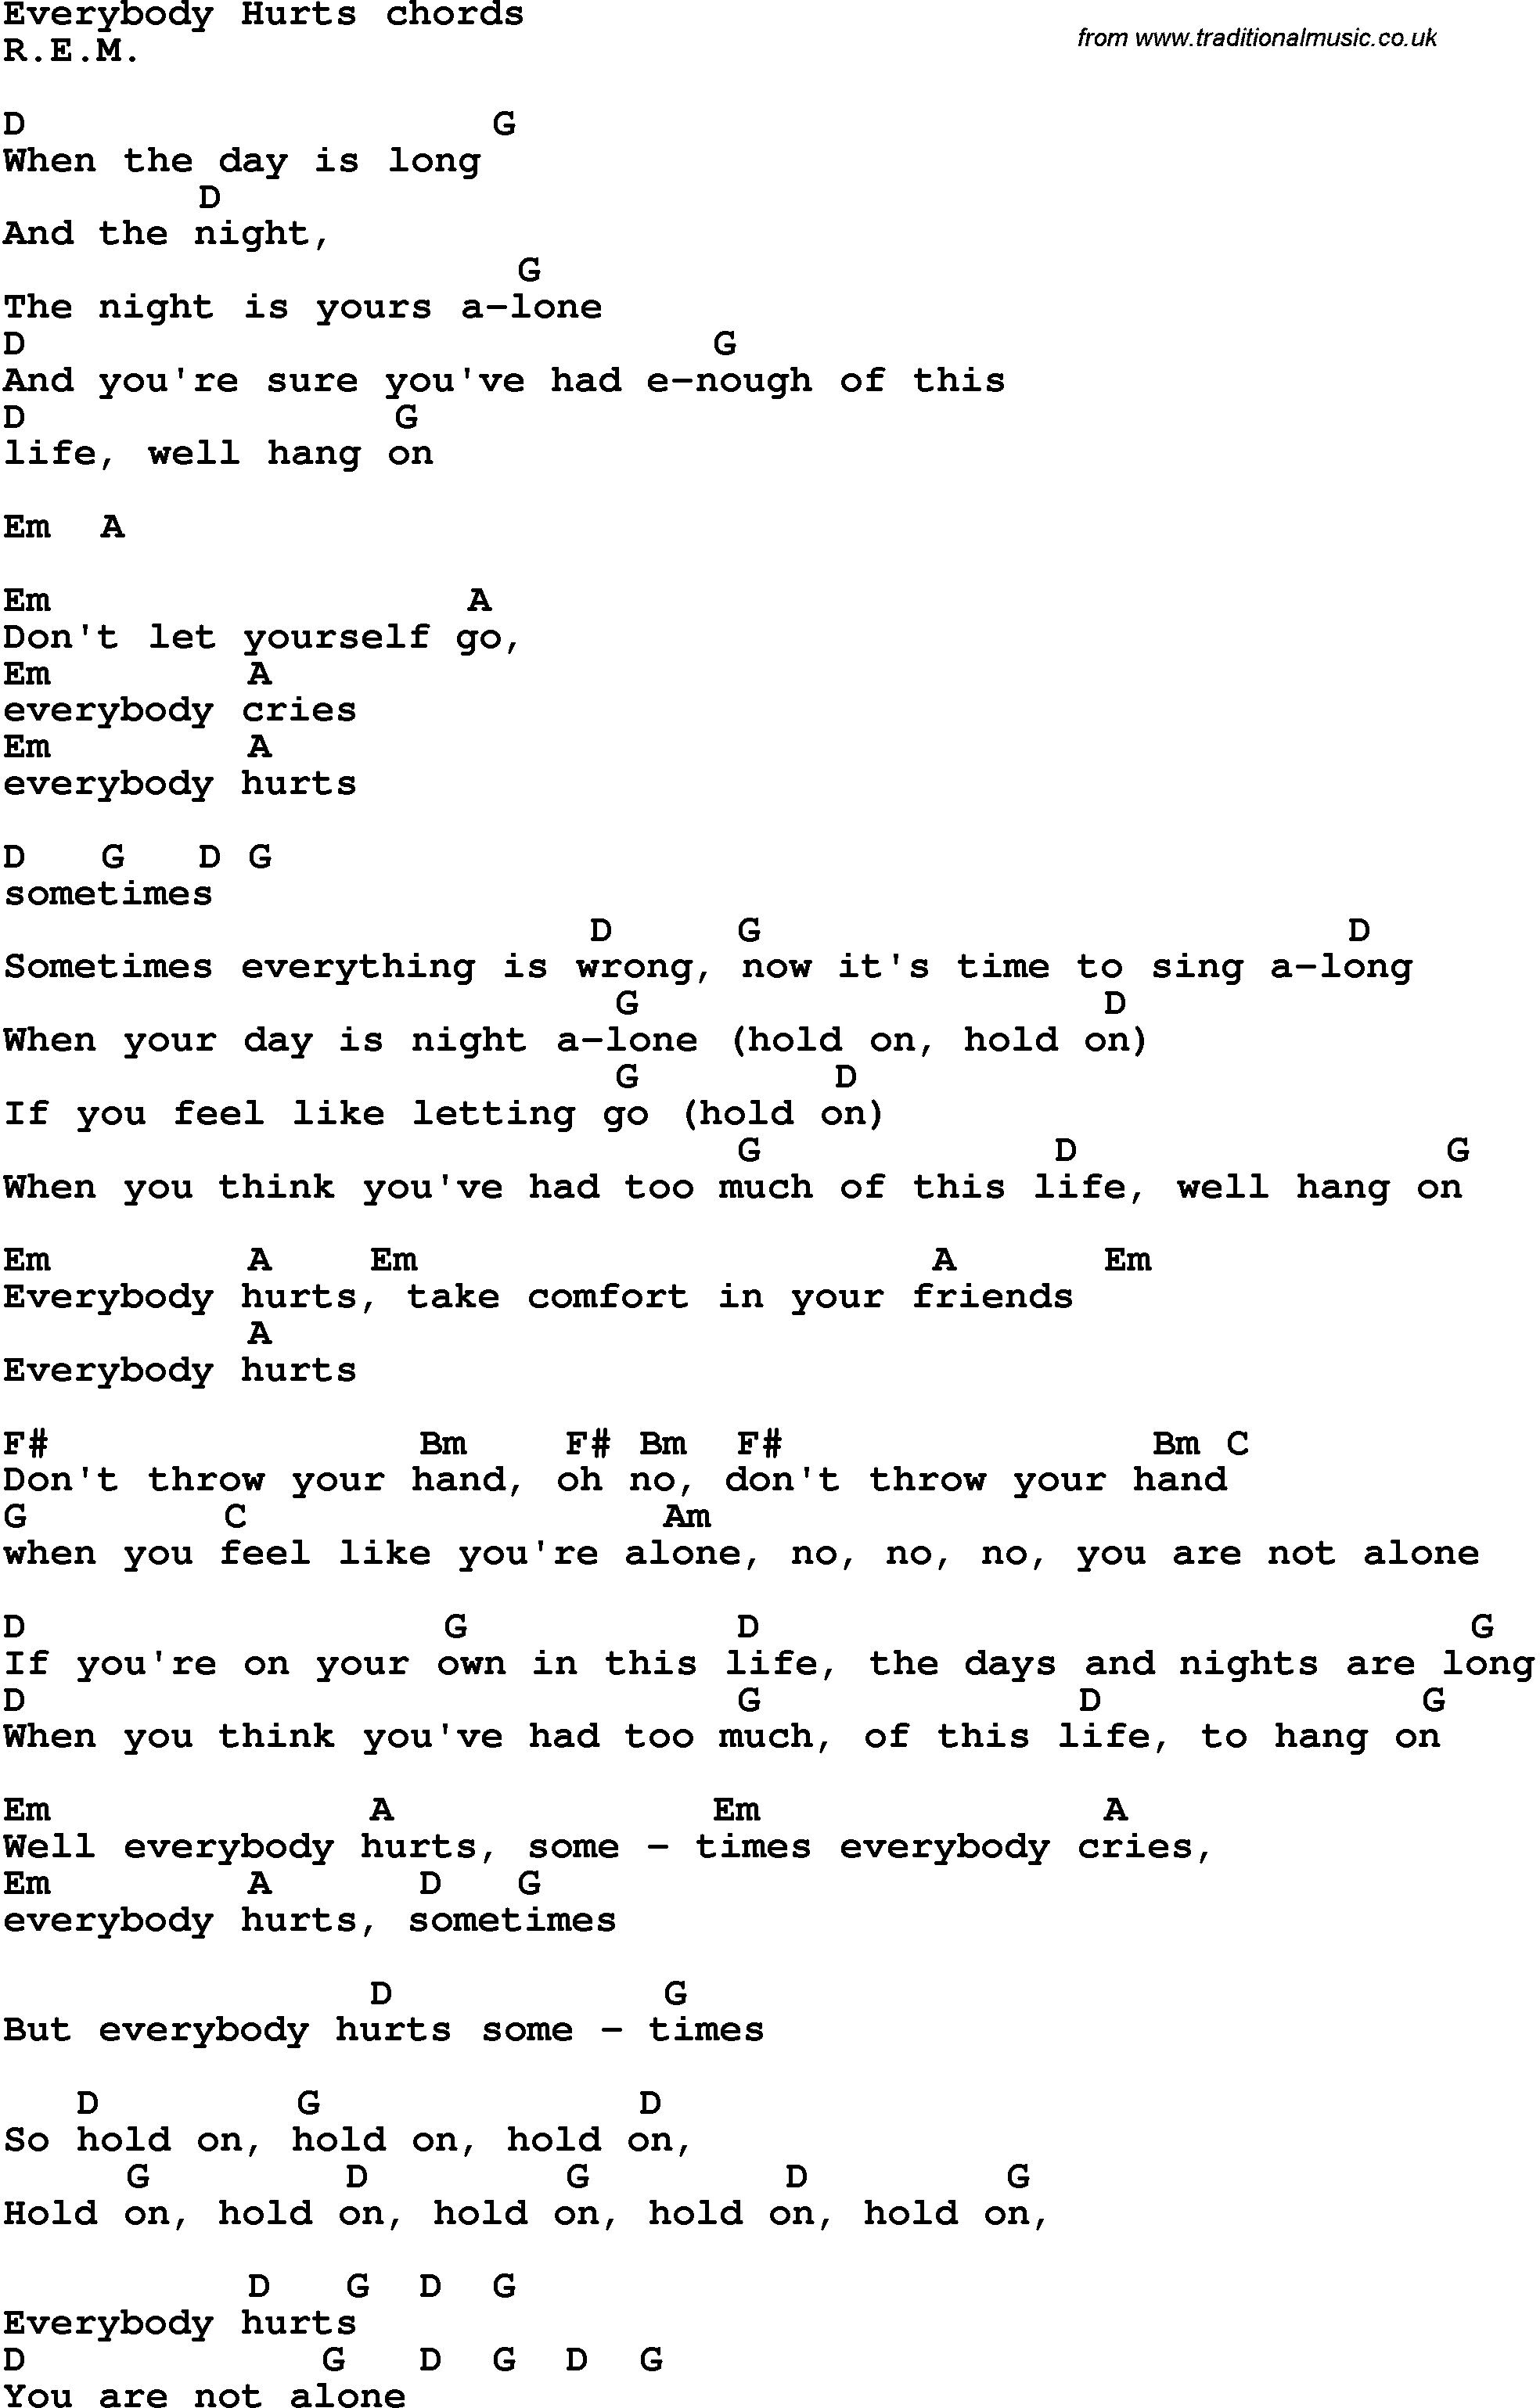 Song Lyrics with guitar chords for Everybody Hurts